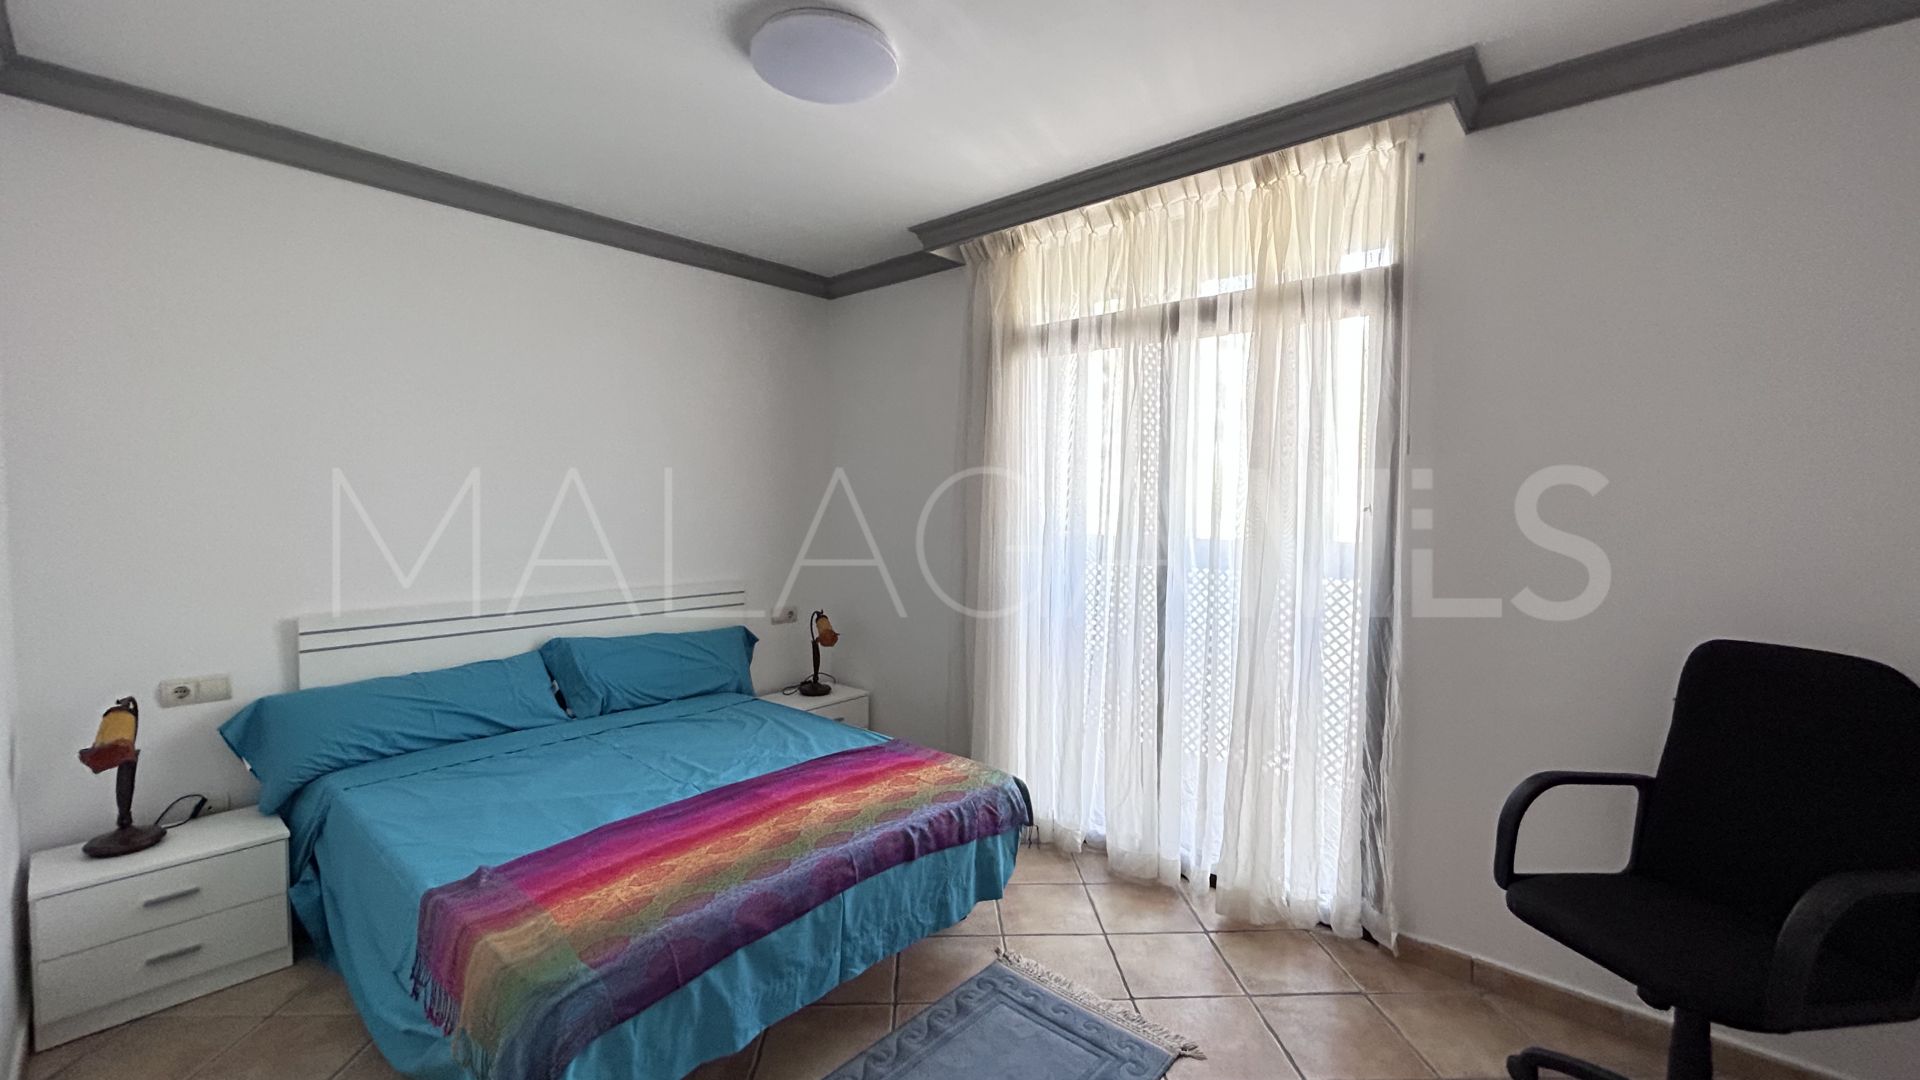 For sale 2 bedrooms apartment in Paraiso Barronal